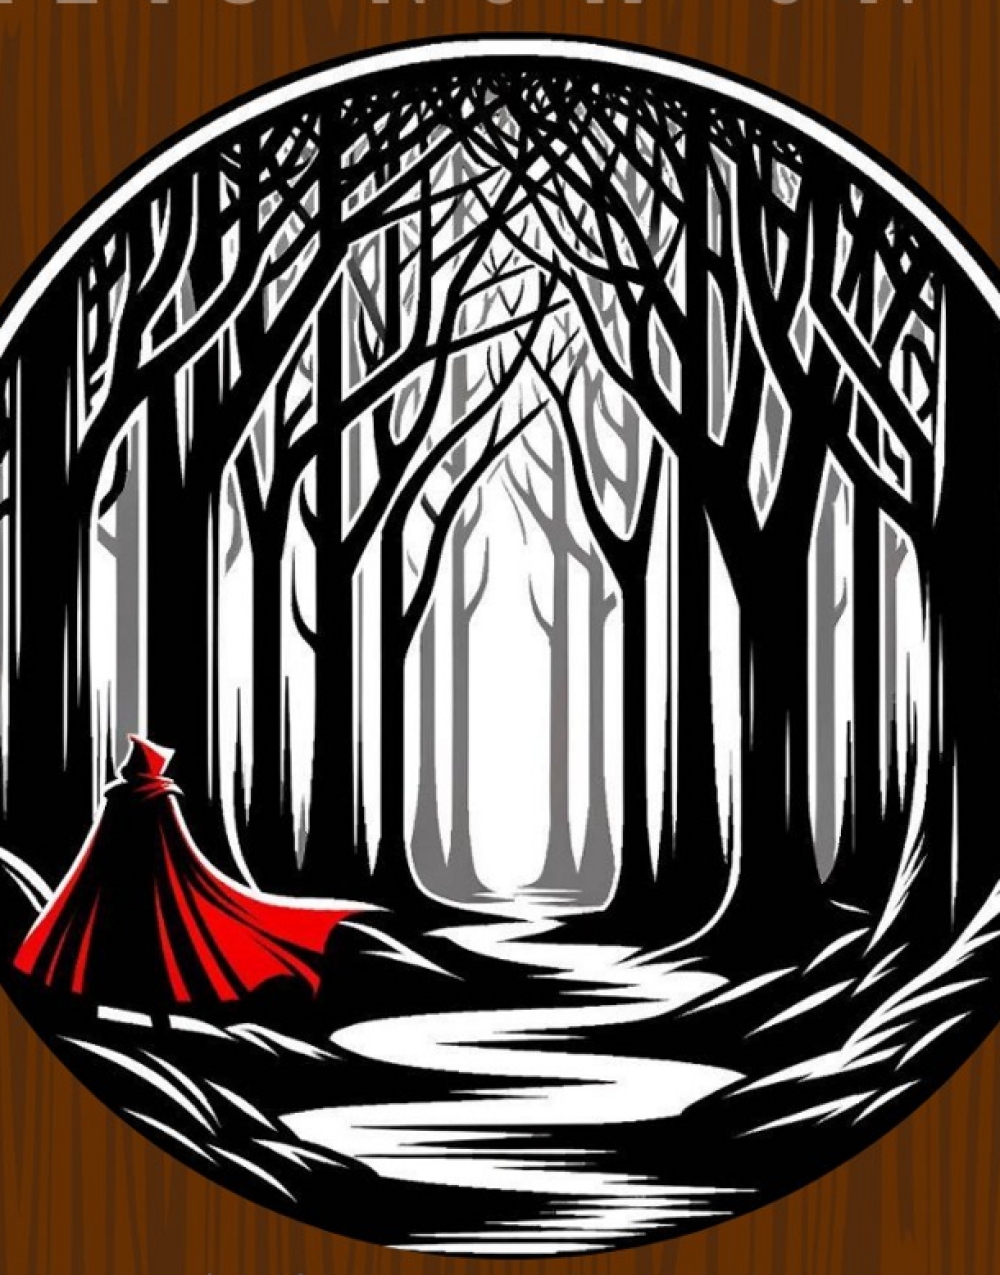 Into the Woods JR. - Center Stage Youth Theatre Stage Mag